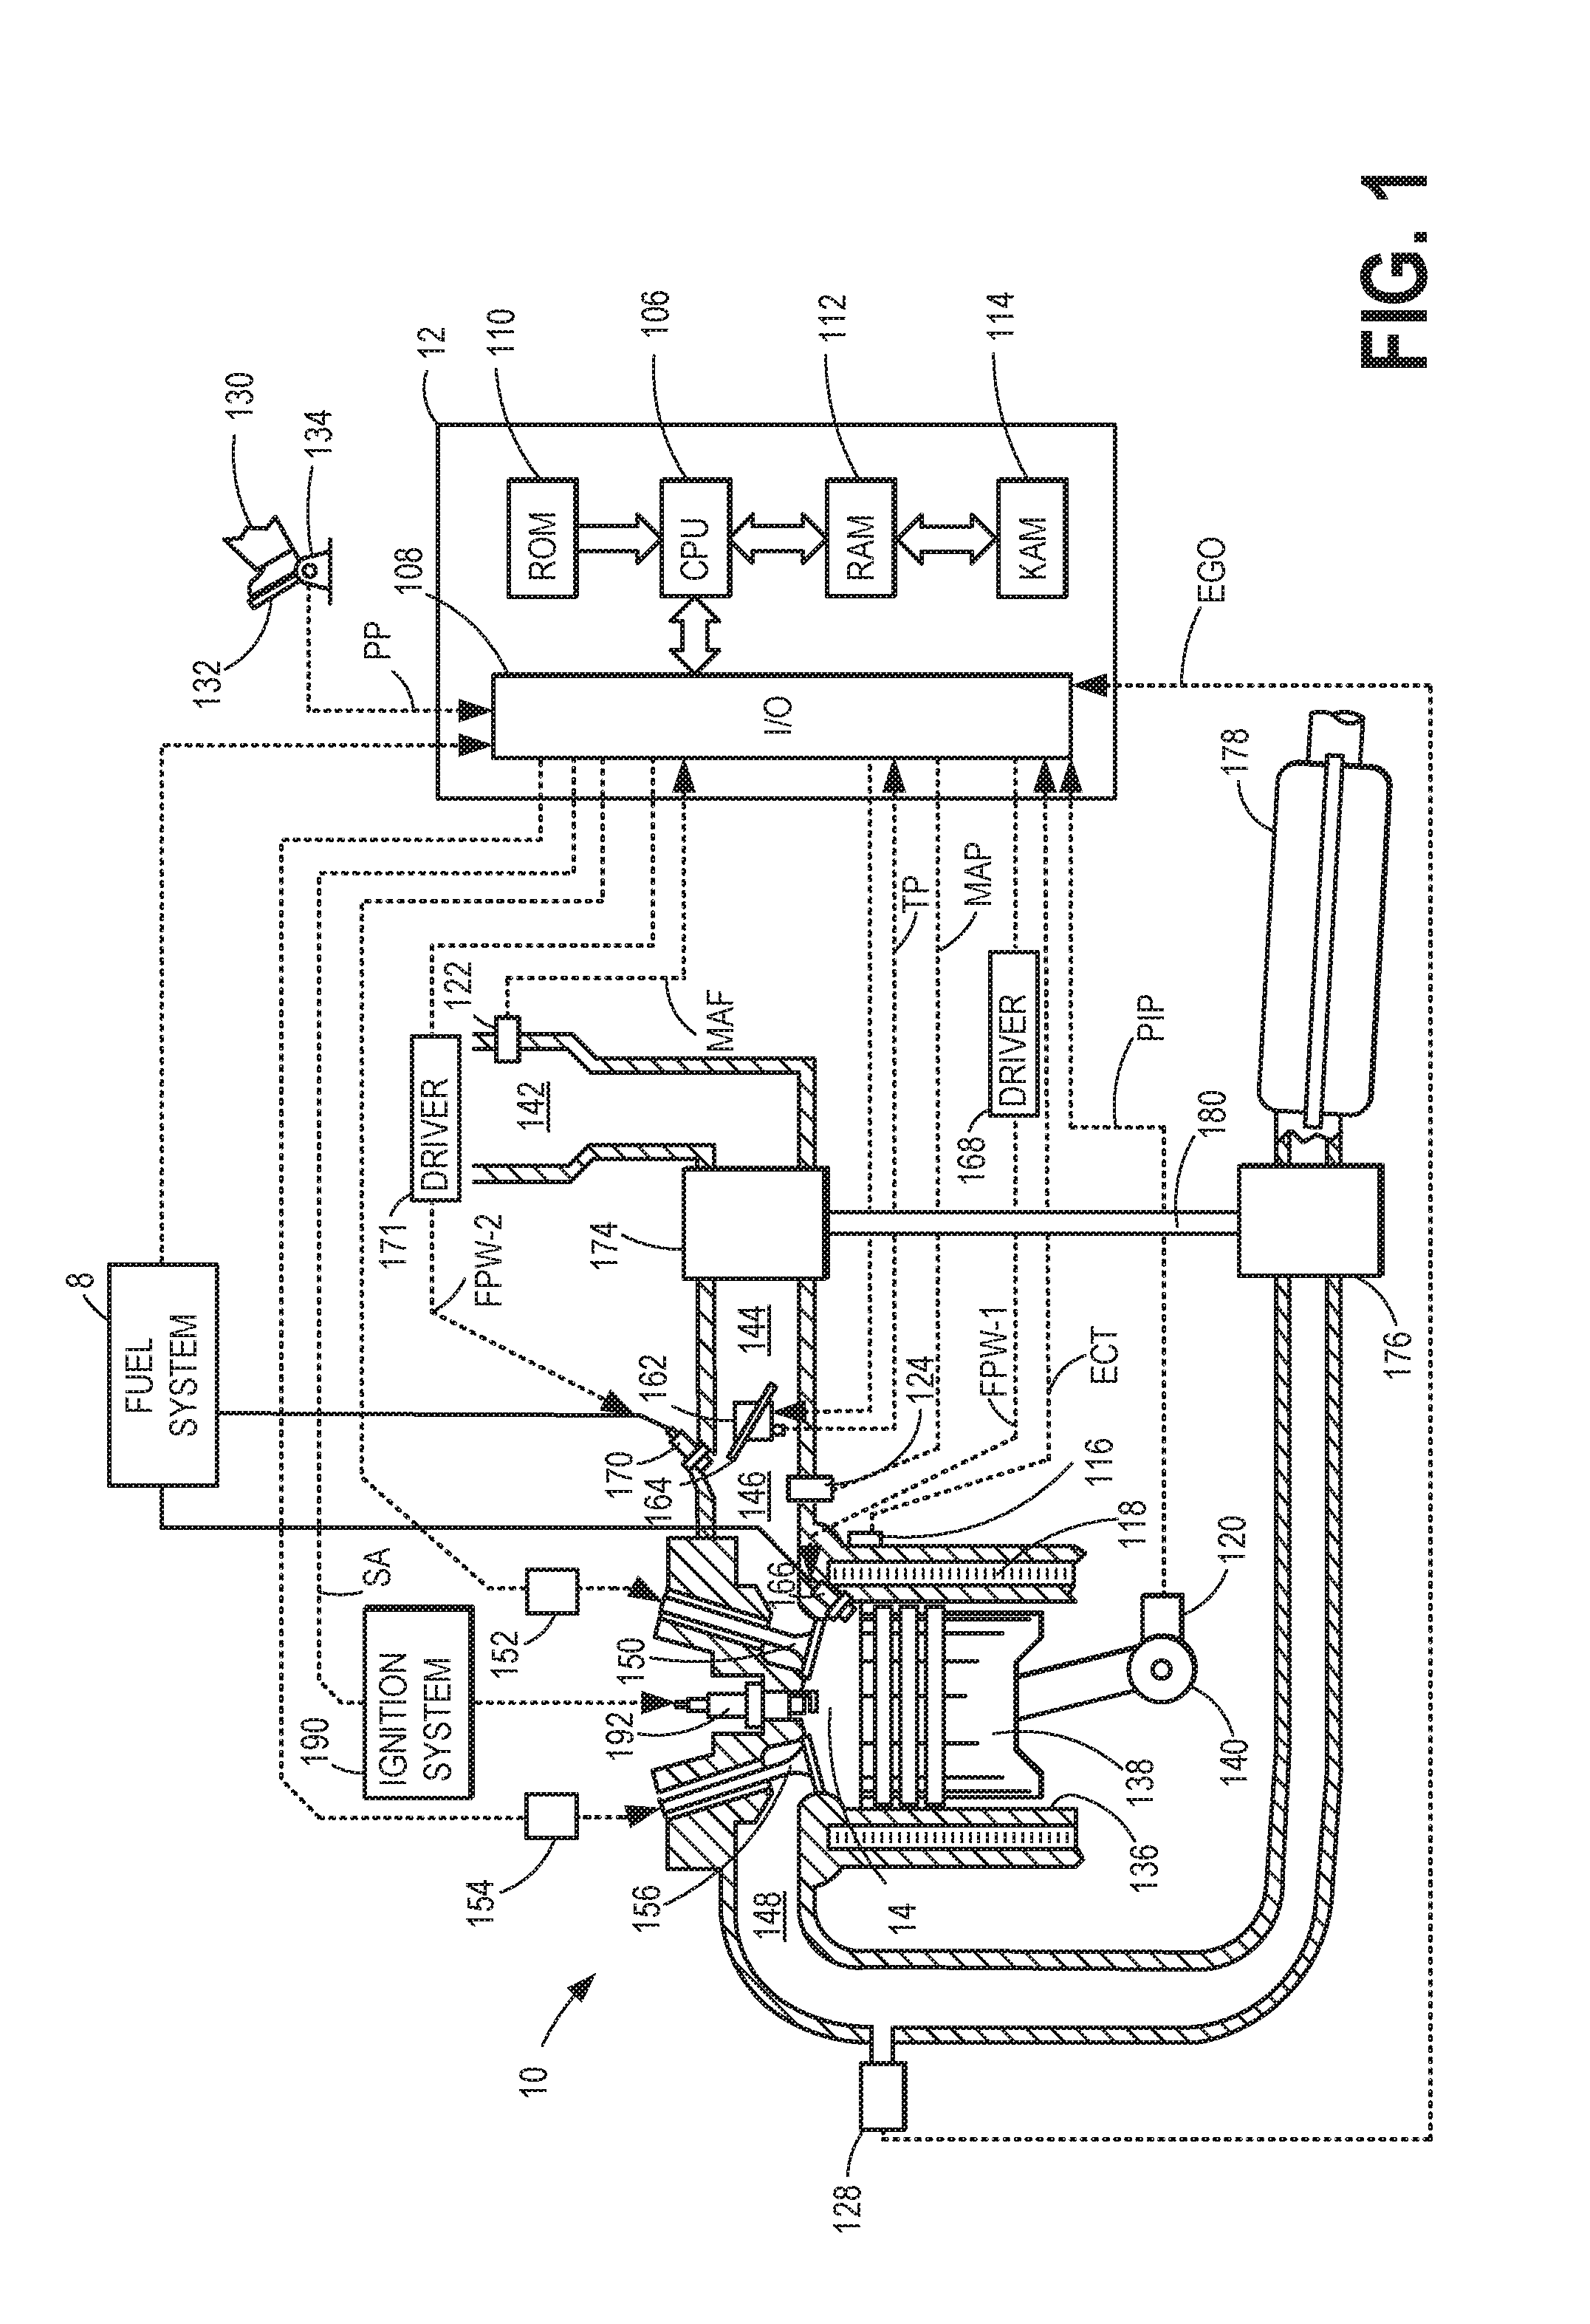 Methods and systems for port fuel injection control